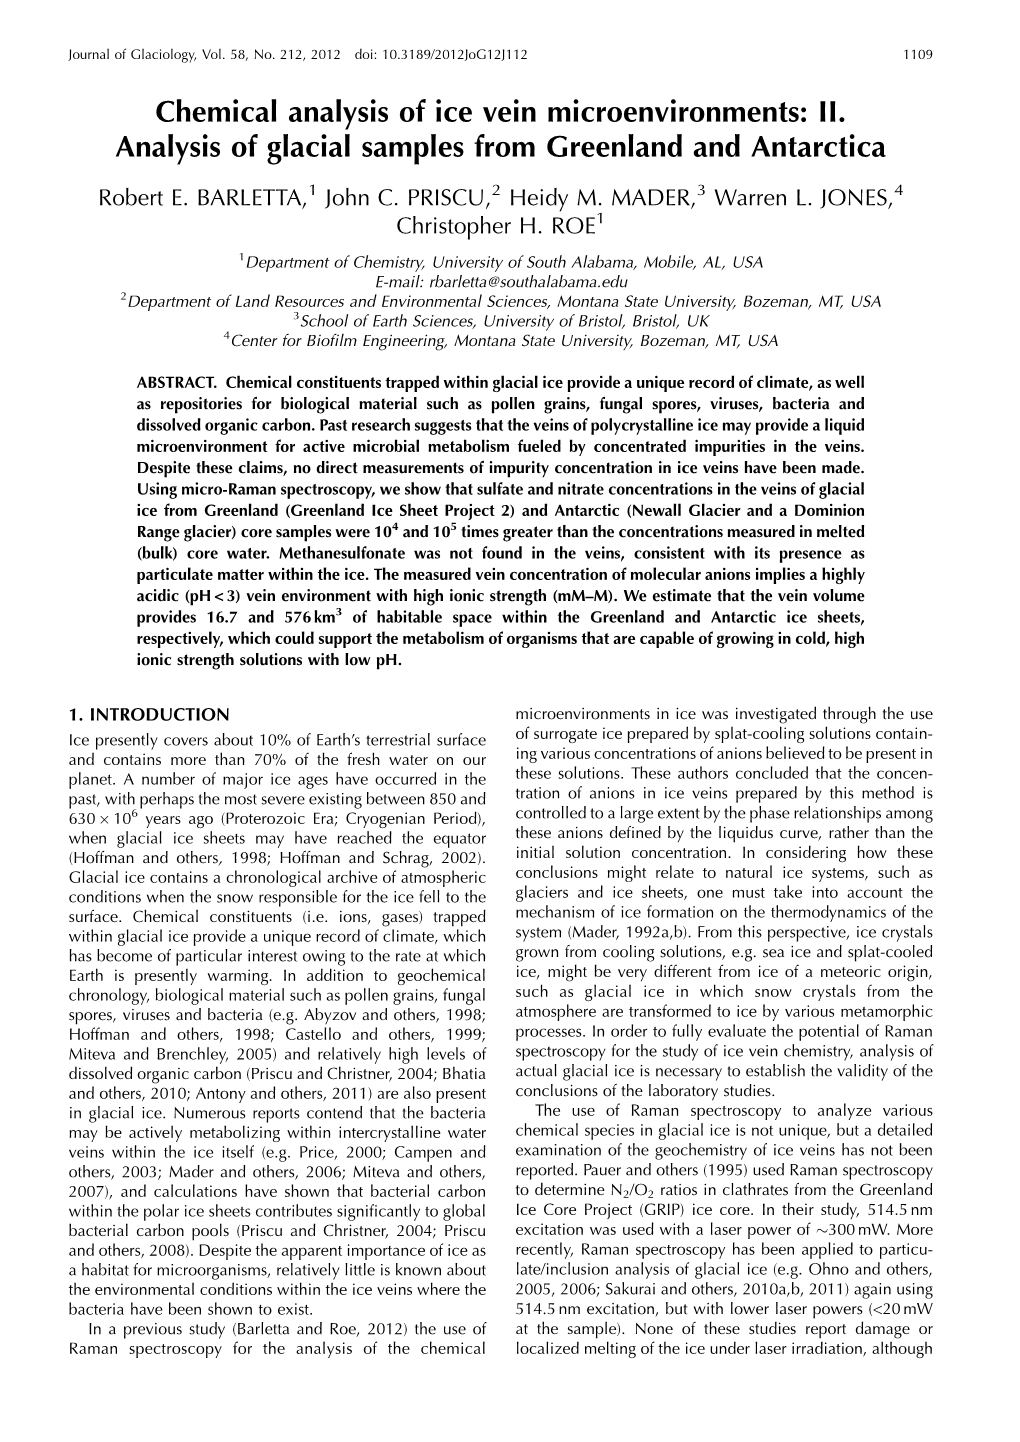 Chemical Analysis of Ice Vein Microenvironments: II